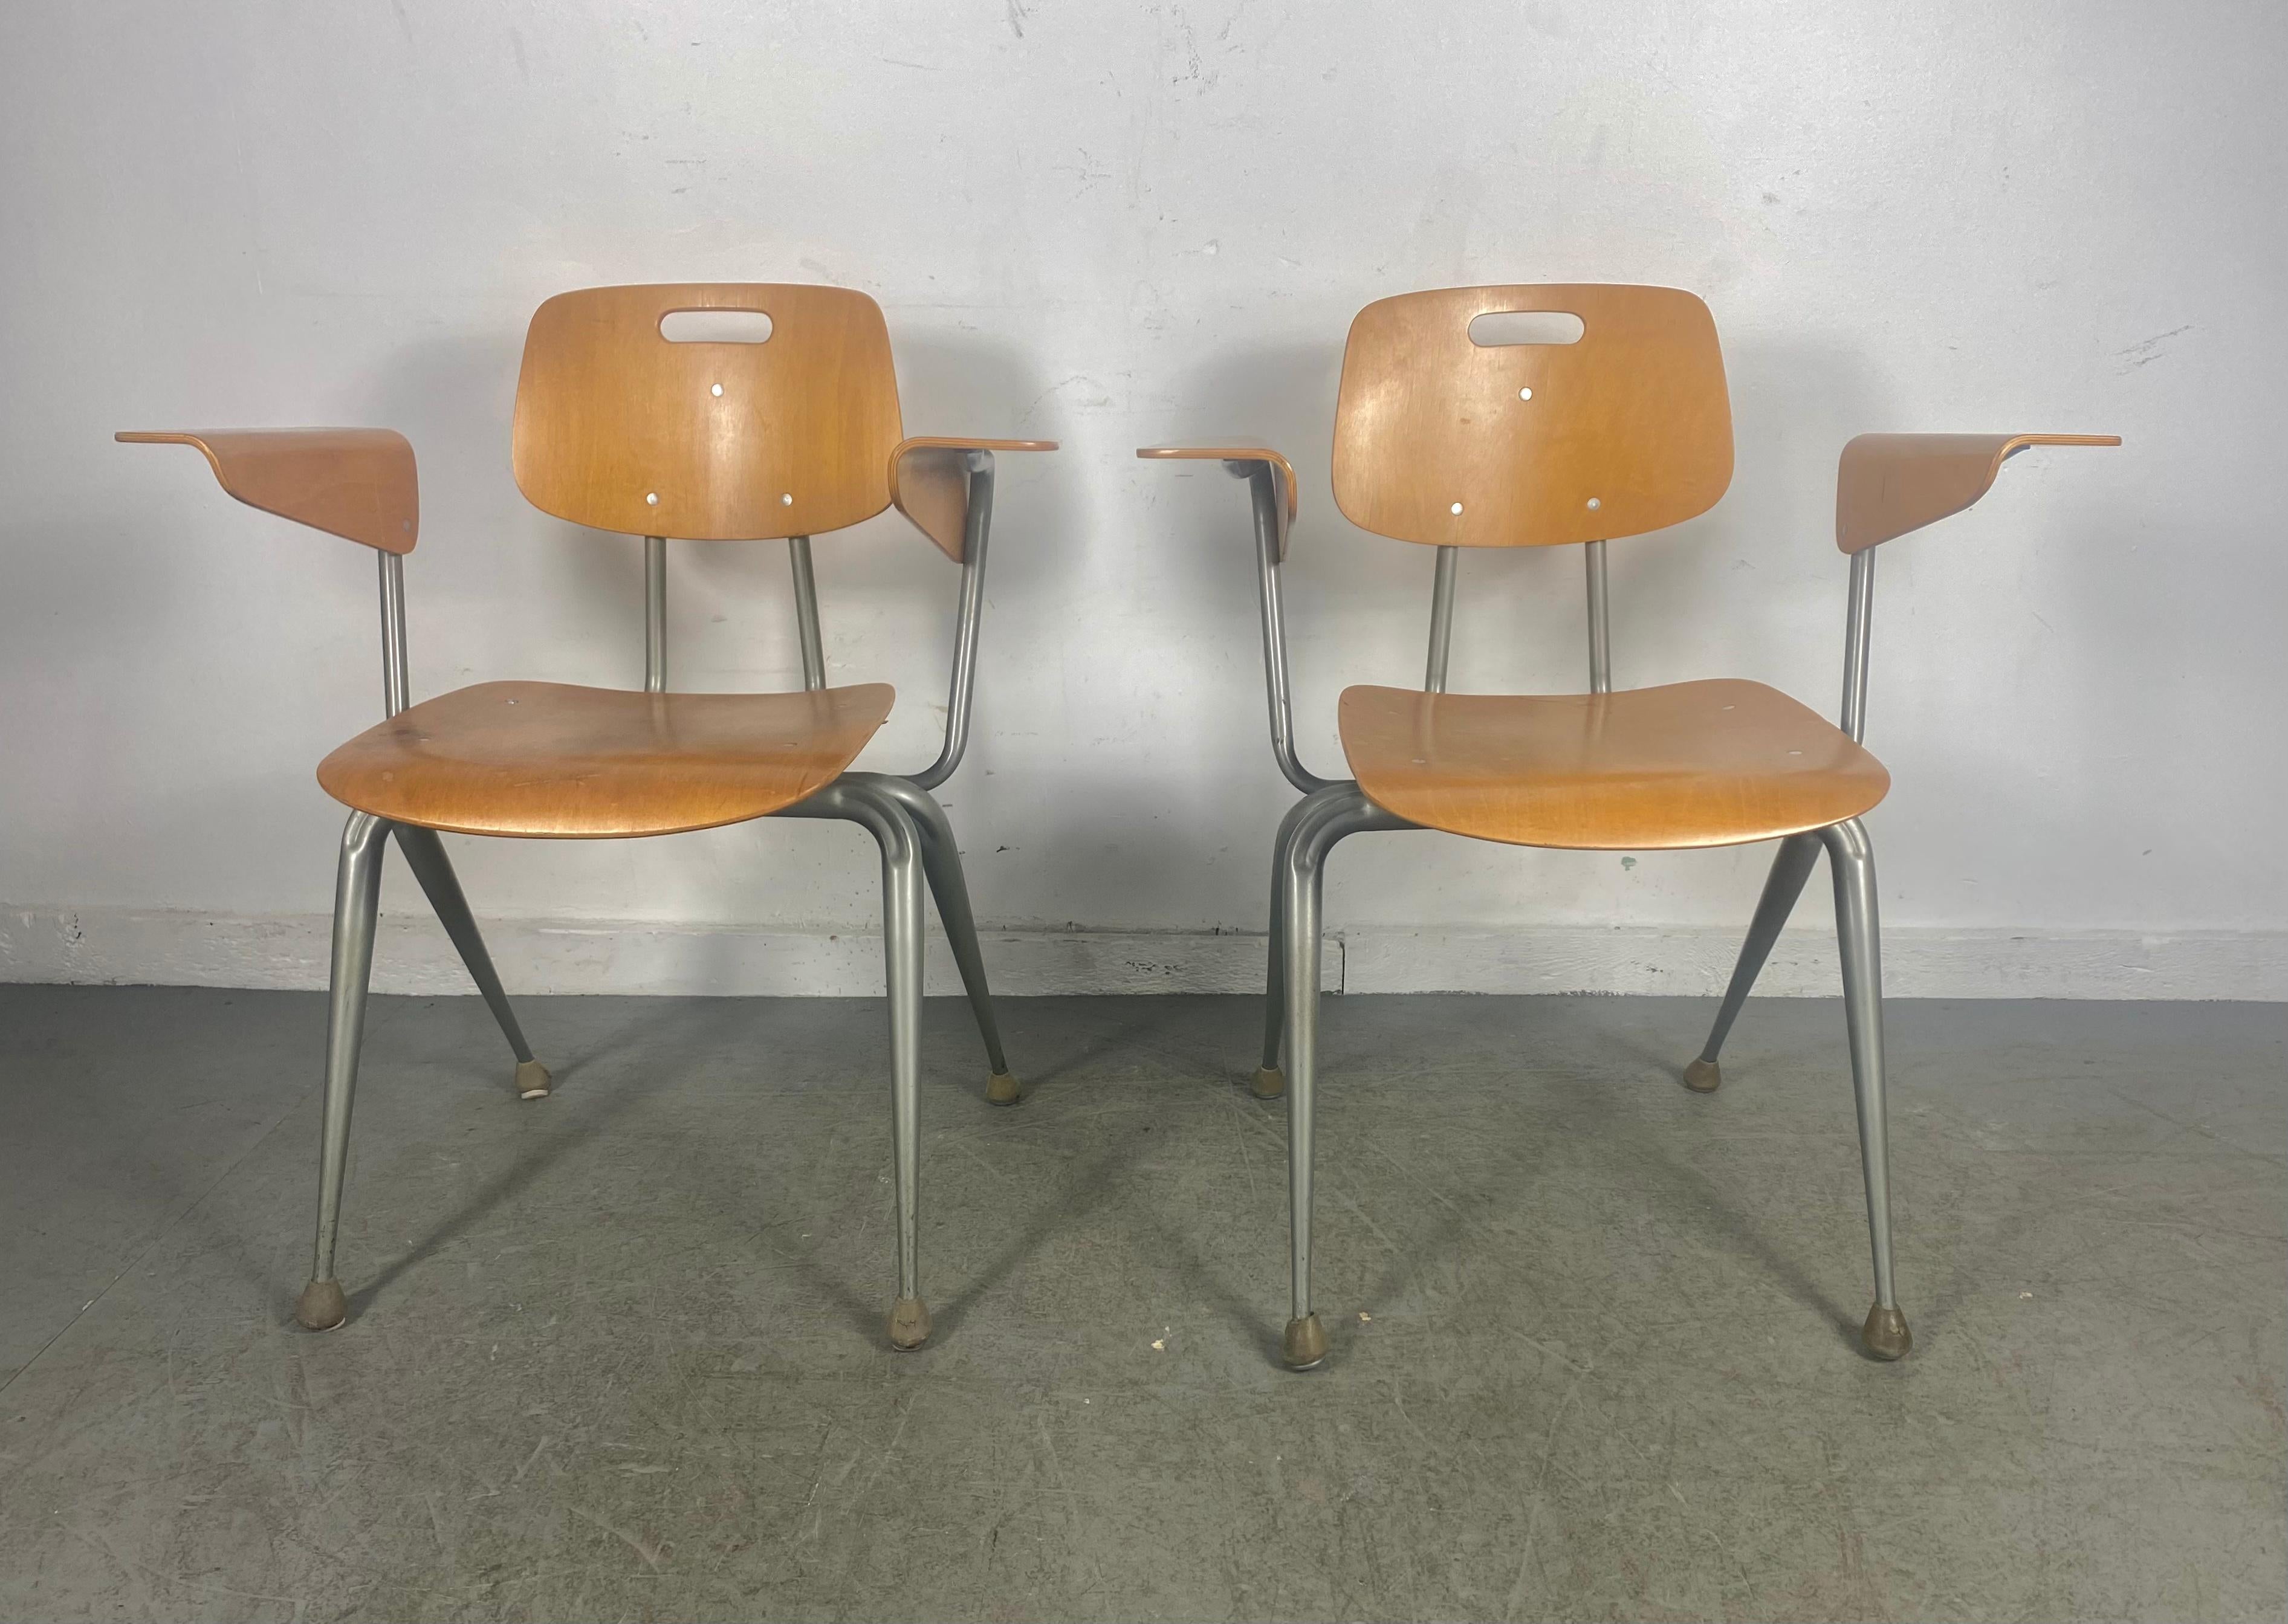 Modern molded maple plywood and steel tube armchairs by Brunswick from the 1950's. This is a wonderful example of how cutting edge mid century modern design made its way into post-war American institutions. This uncommon model is similar to the more